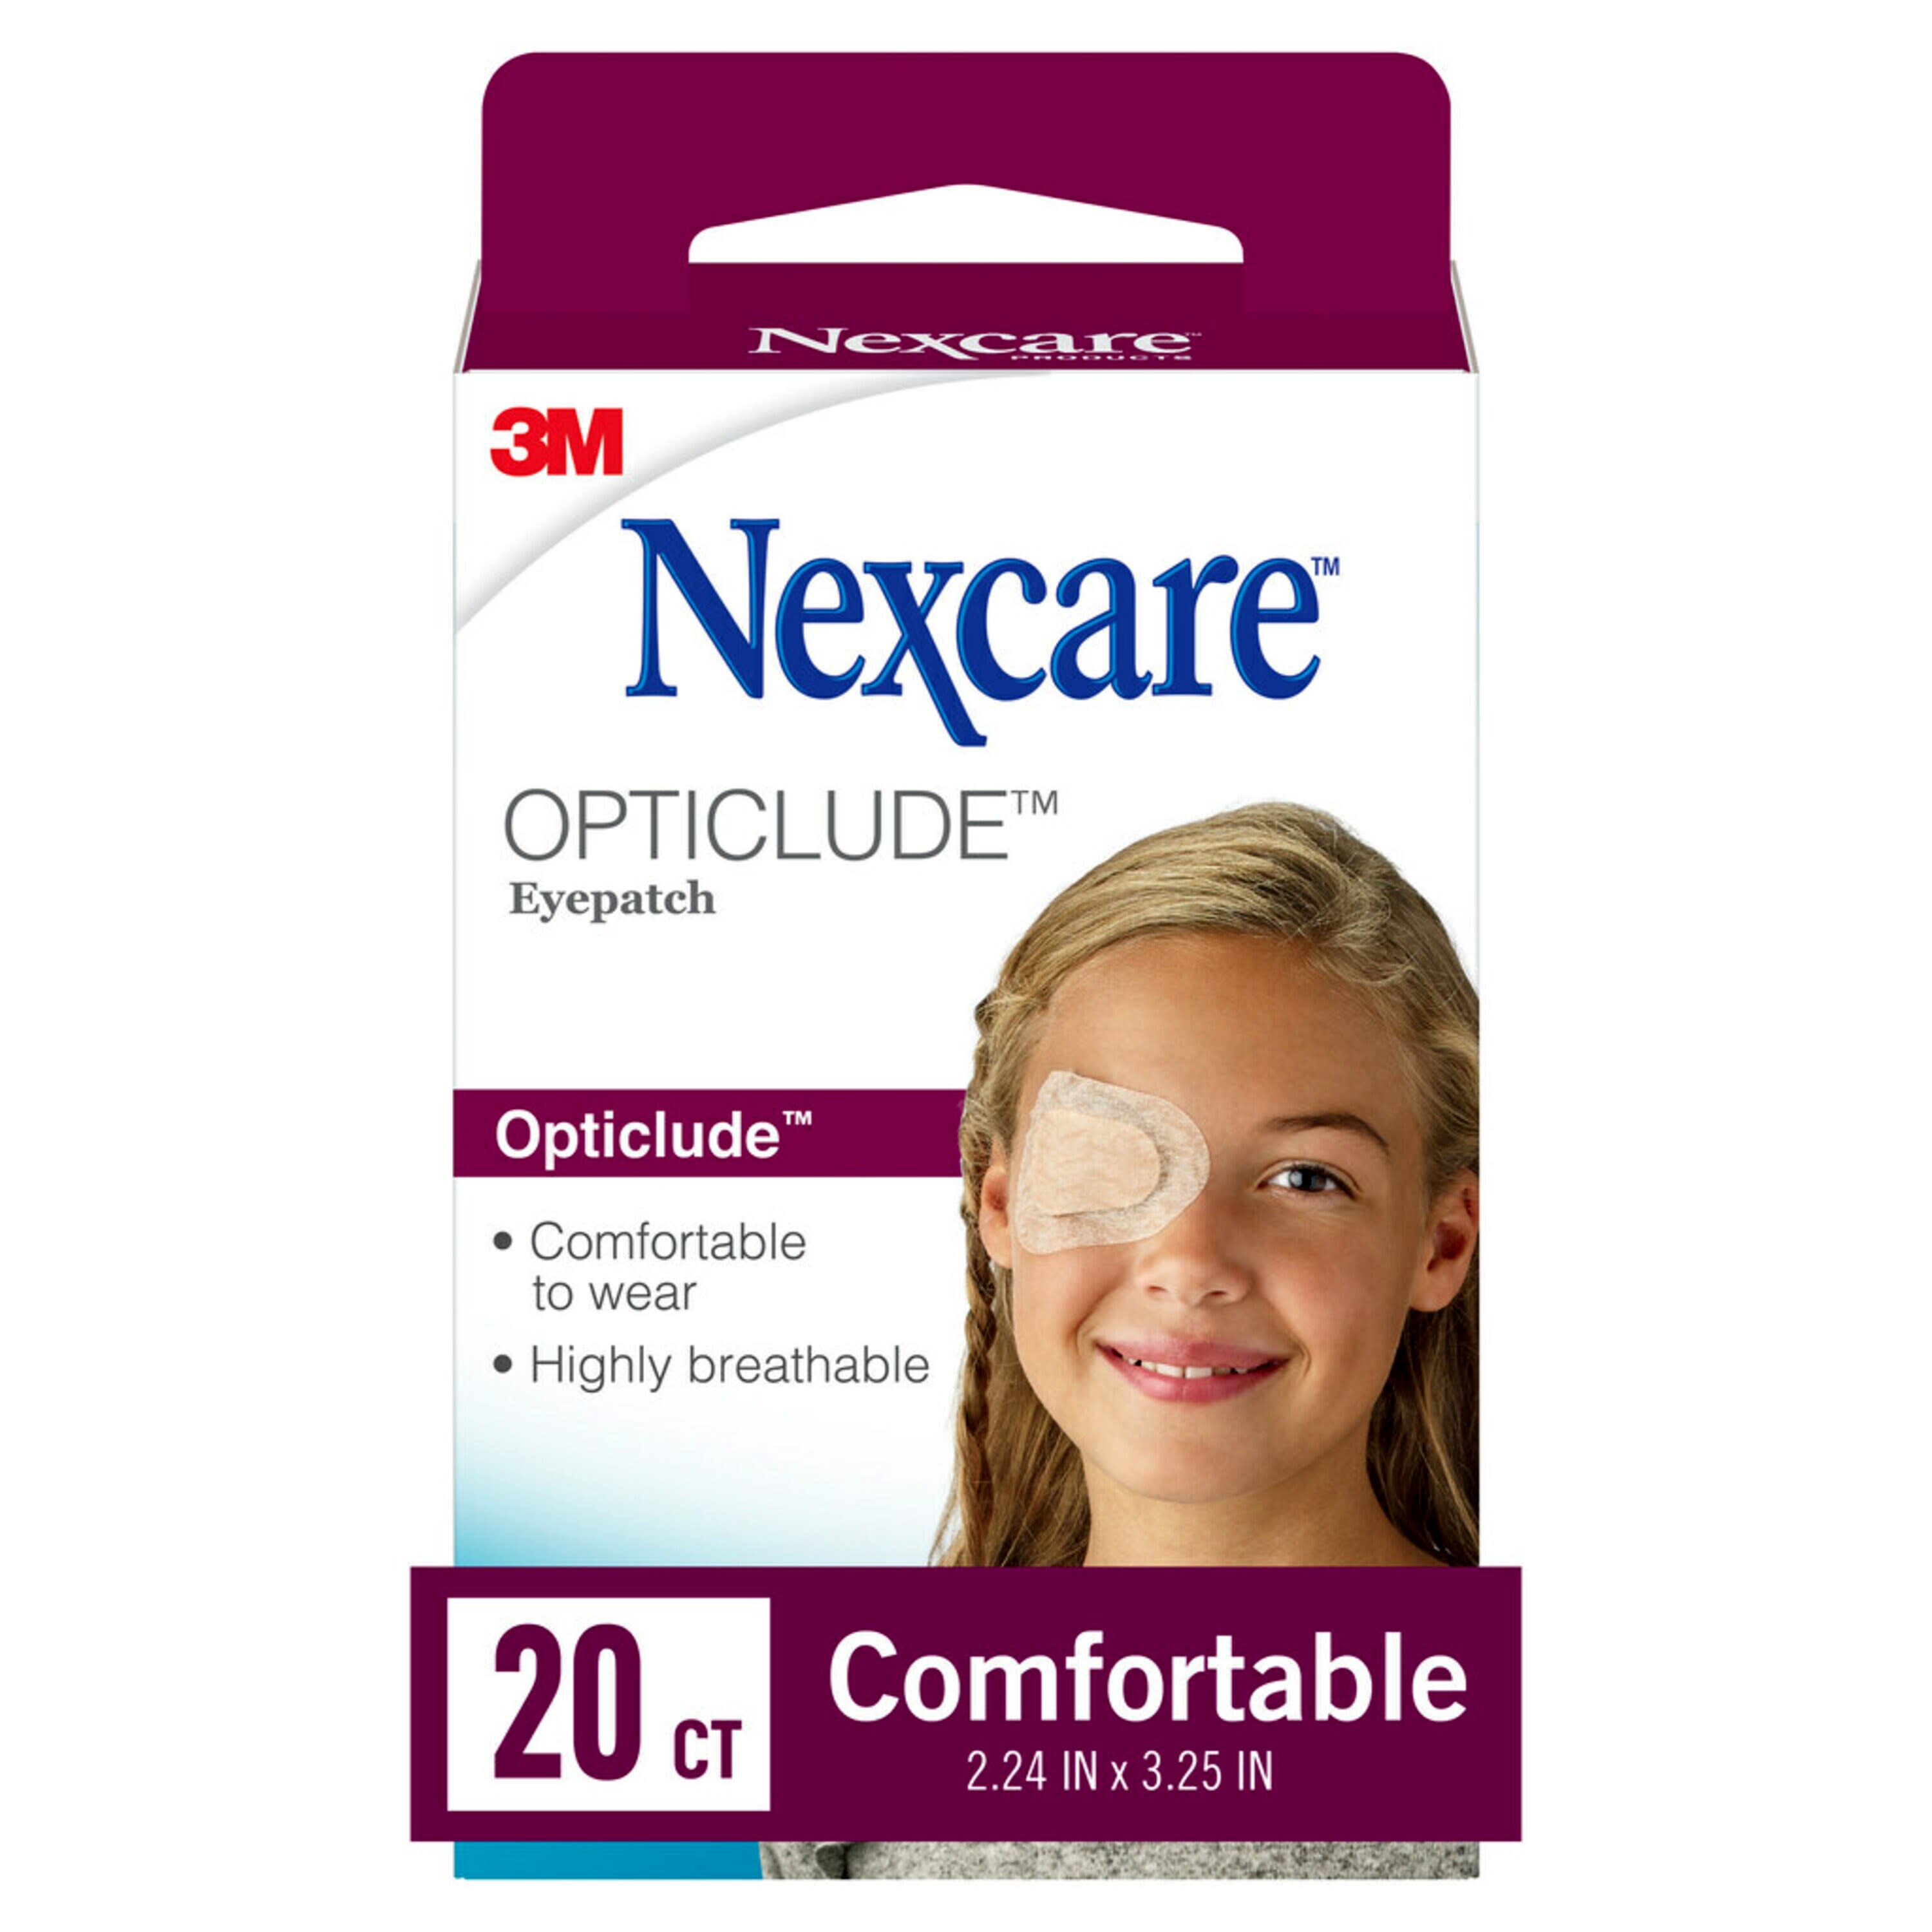 Nexcare Opticlude Comfort Eye Patch, Nude, Breathable, 20 Count - image 2 of 7